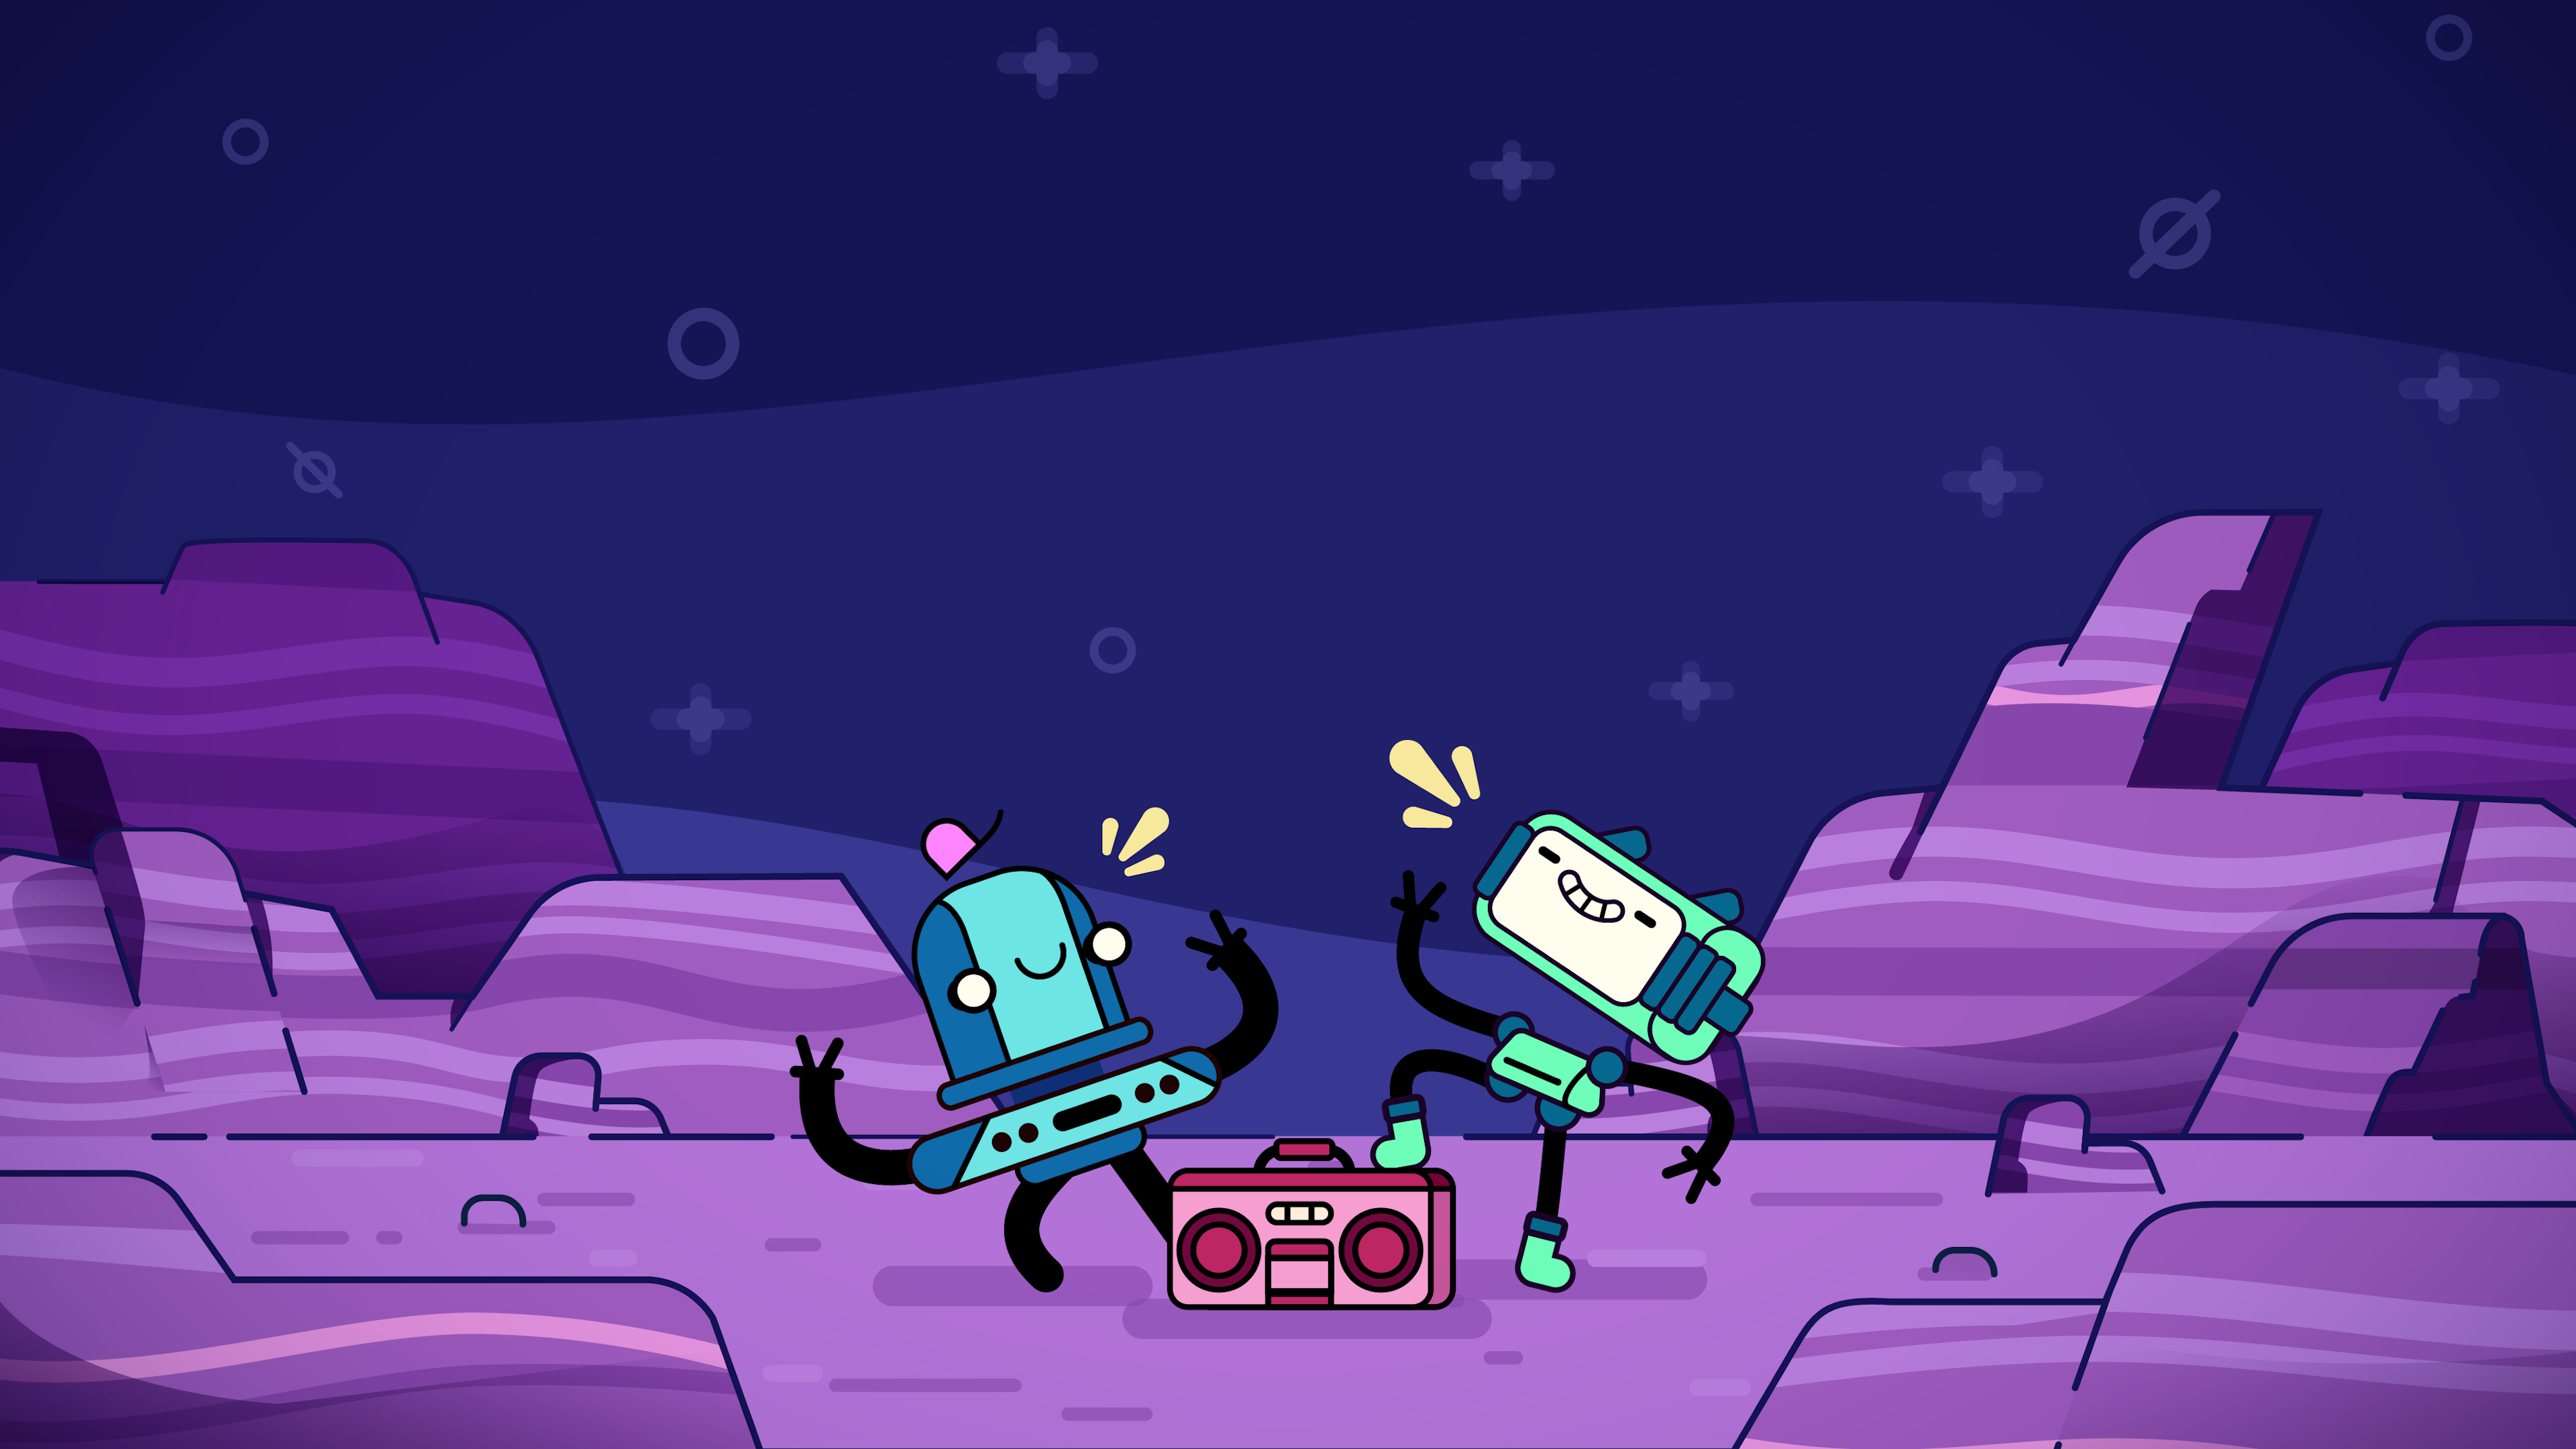 Two Bots dancing with a radio